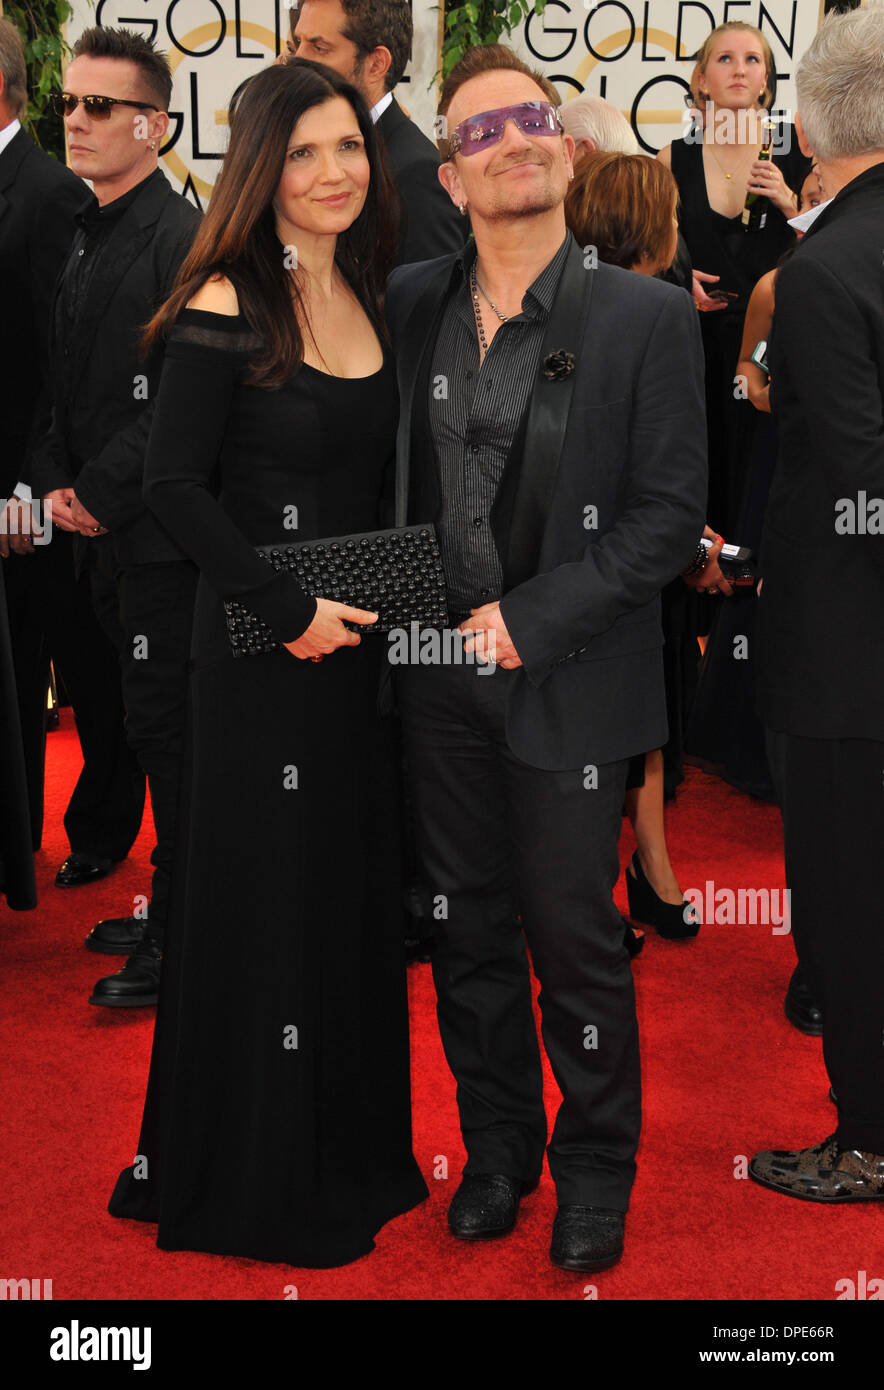 Los Angeles, California, USA. 12th Jan, 2014. Ali Hewson, Bono attending the 71st Golden   Awards - Arrivals held at the Beverly Hilton Hotel in Beverly Hills California on .January 12, 2014 .Credit: Melissa Miller-   Photos Inc. Â© 2014(Credit Image: Credit:  D. Long/Globe Photos/ZUMAPRESS.com/Alamy Live News) Stock Photo